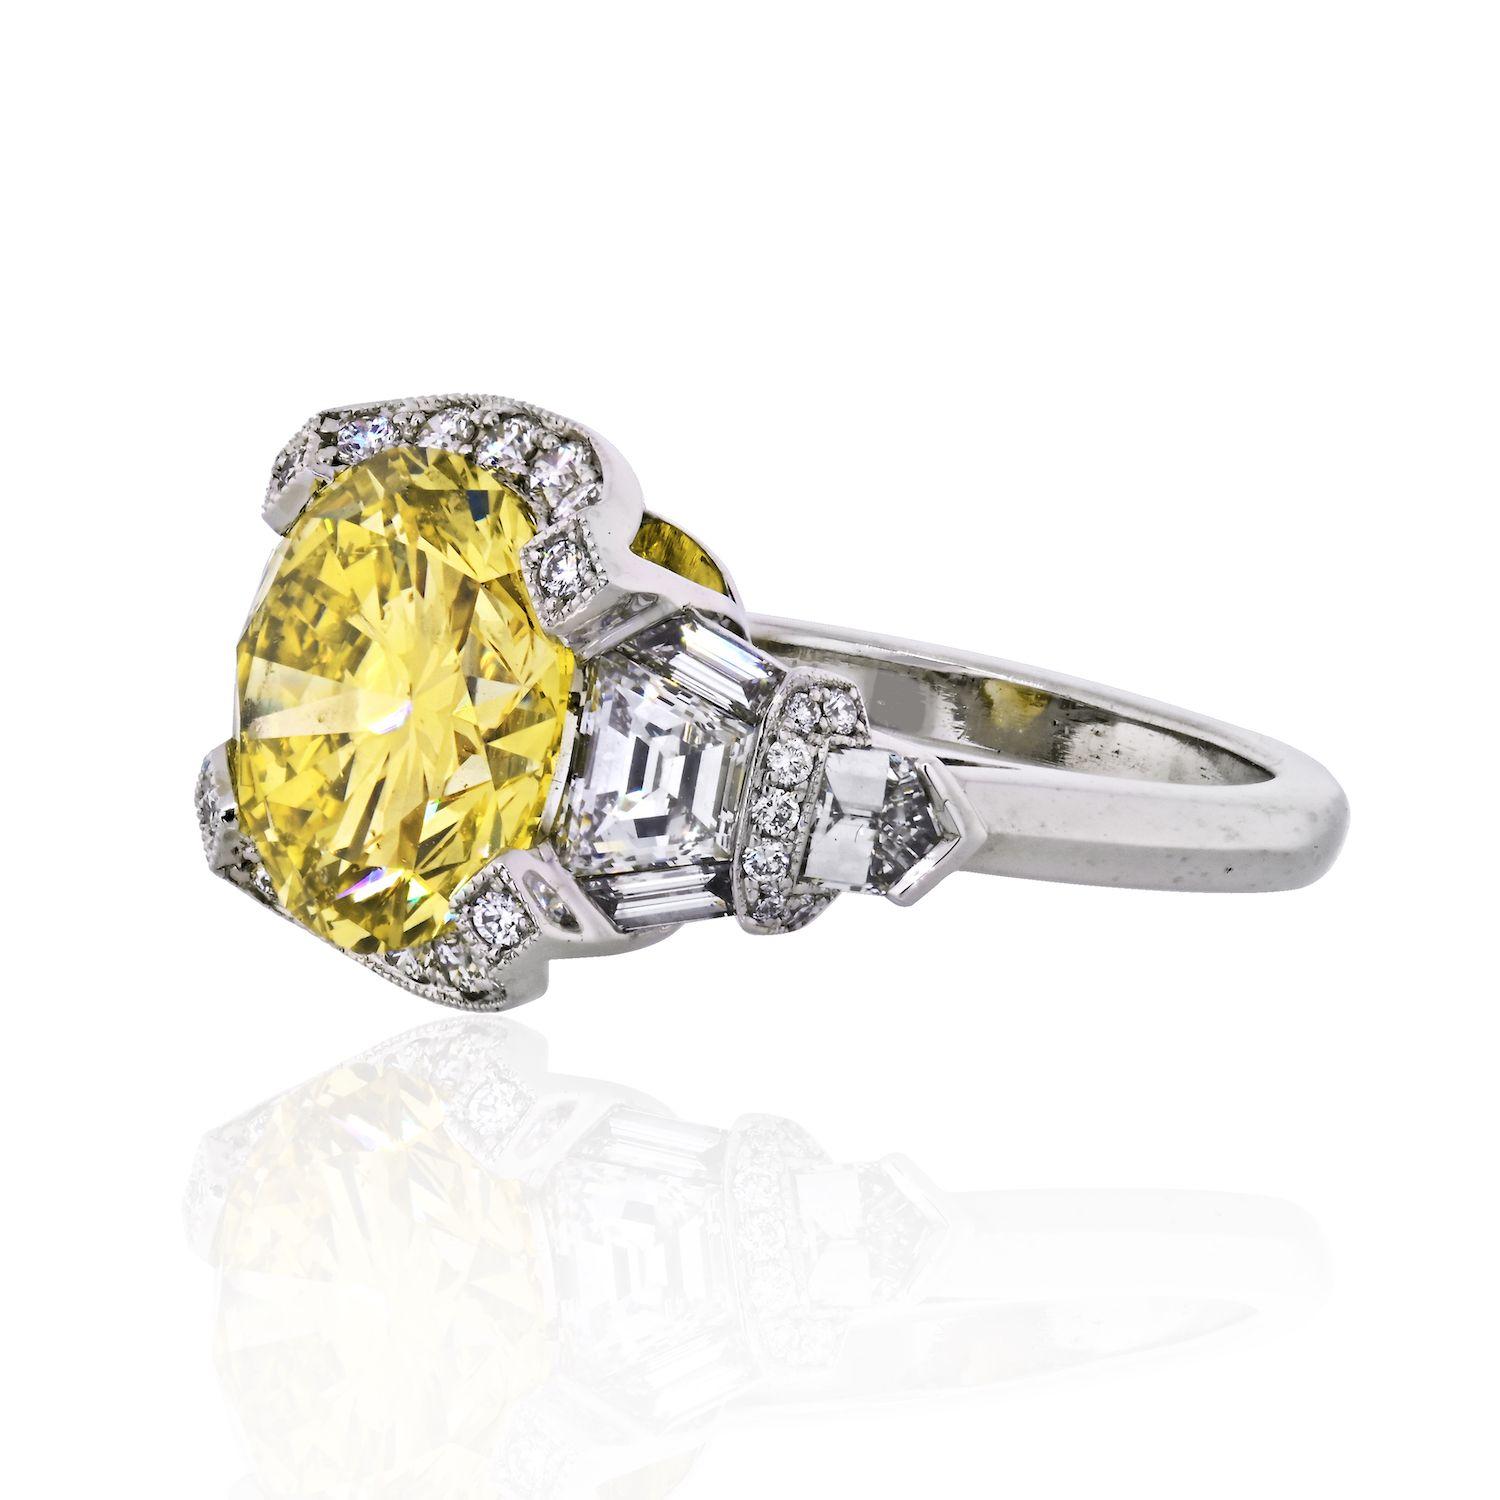 A timeless design from Raymond Yard, this 5.02-carat Fancy Intense Yellow Round Cut diamond ring is a true classic. This estate engagement ring is the type of ring that can be worn for any occasion. The diamond is a rare 5 carat fancy intense round